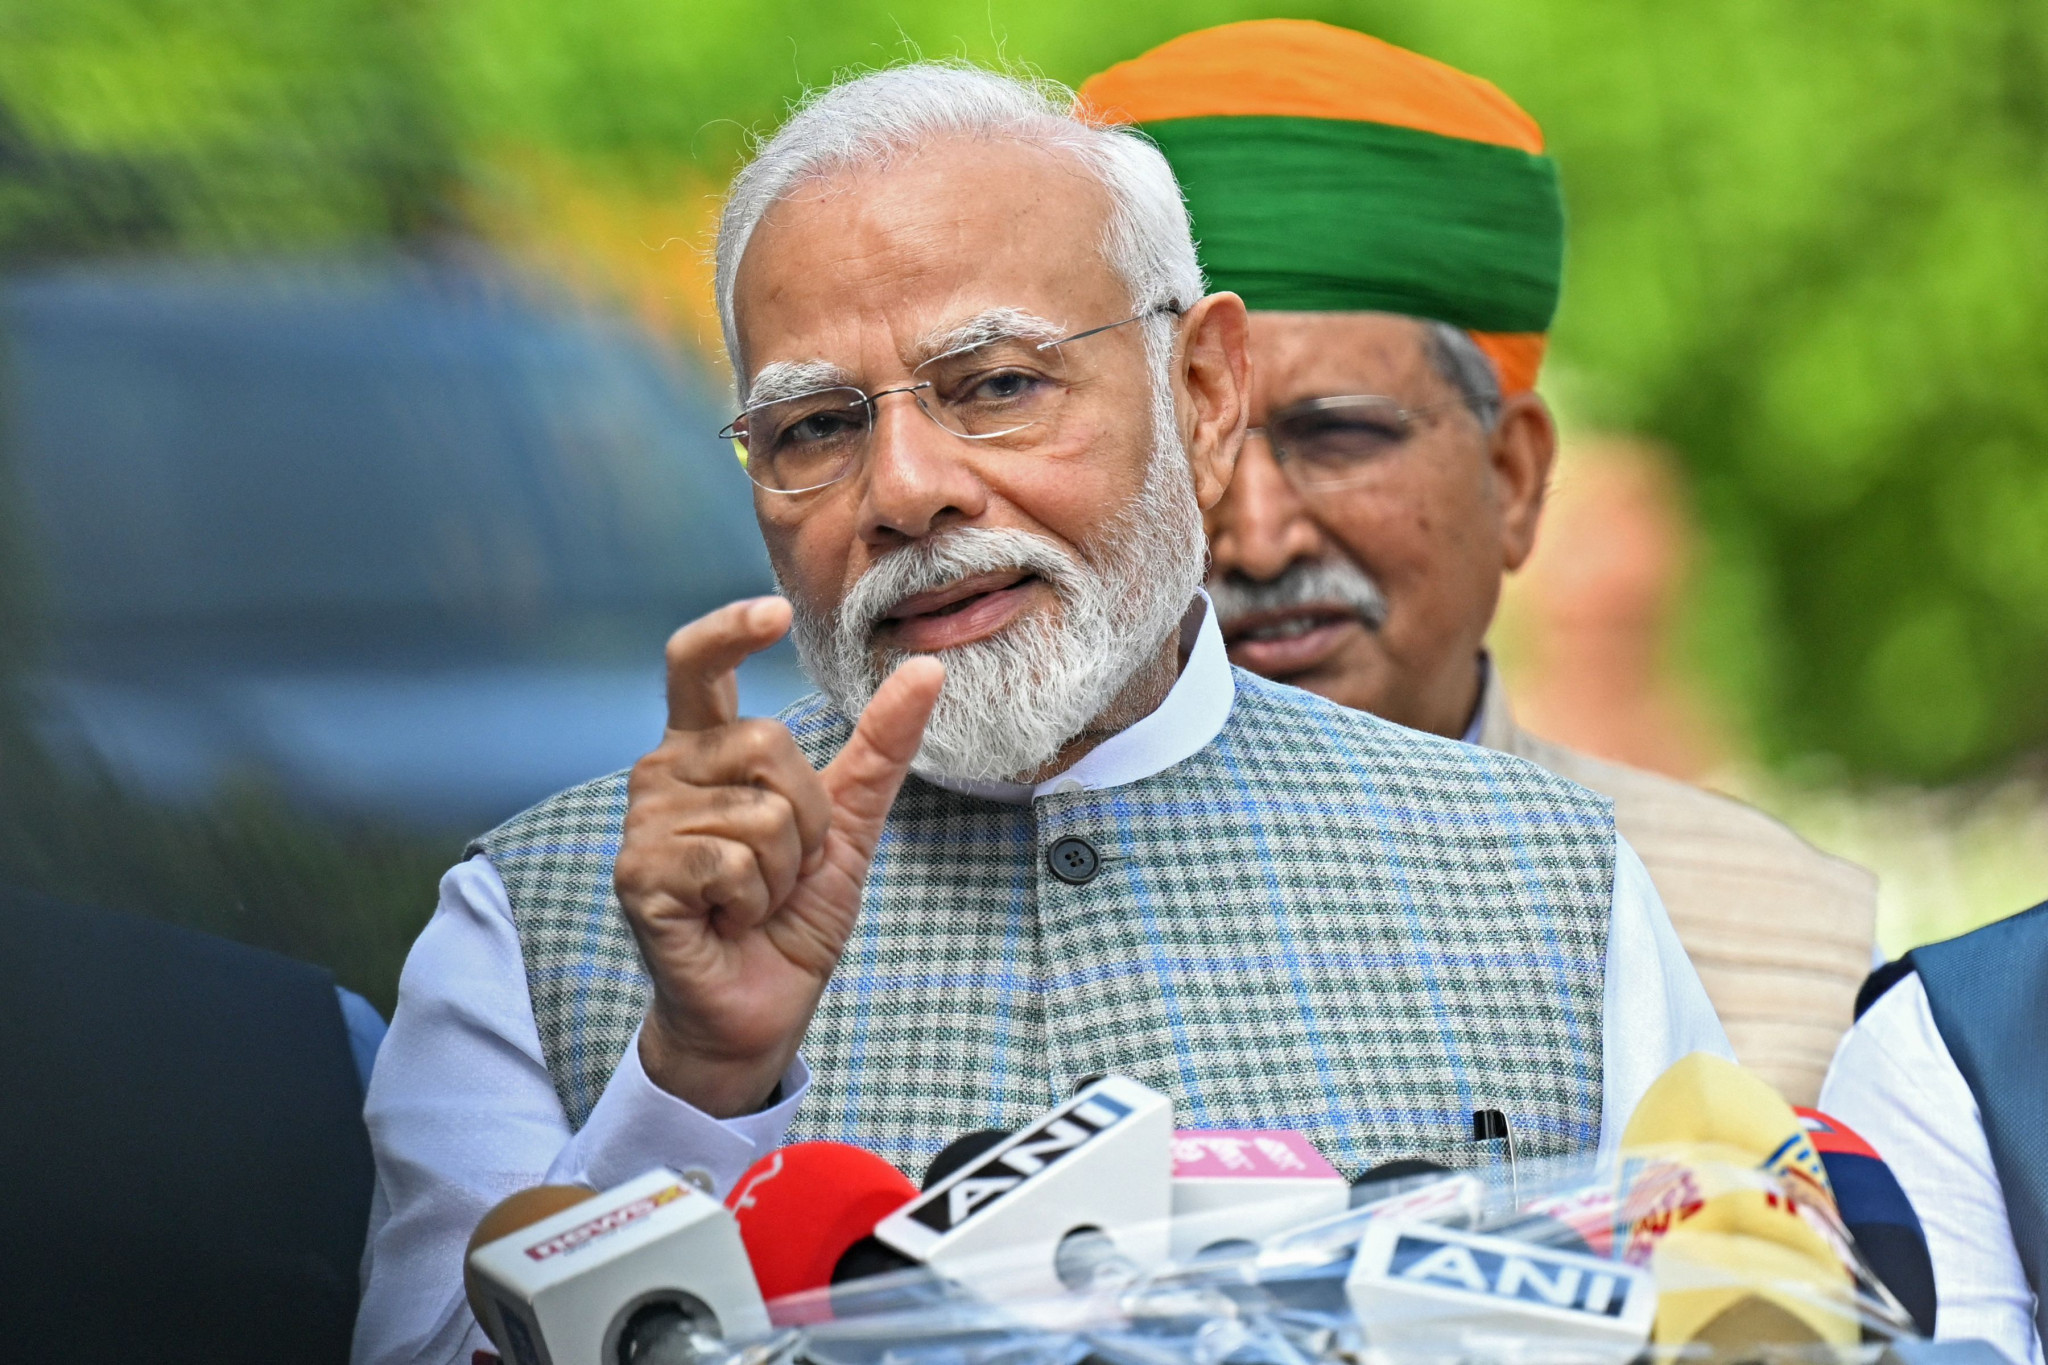 Modi admits 2010 Commonwealth Games in New Delhi brought "disrepute" to country